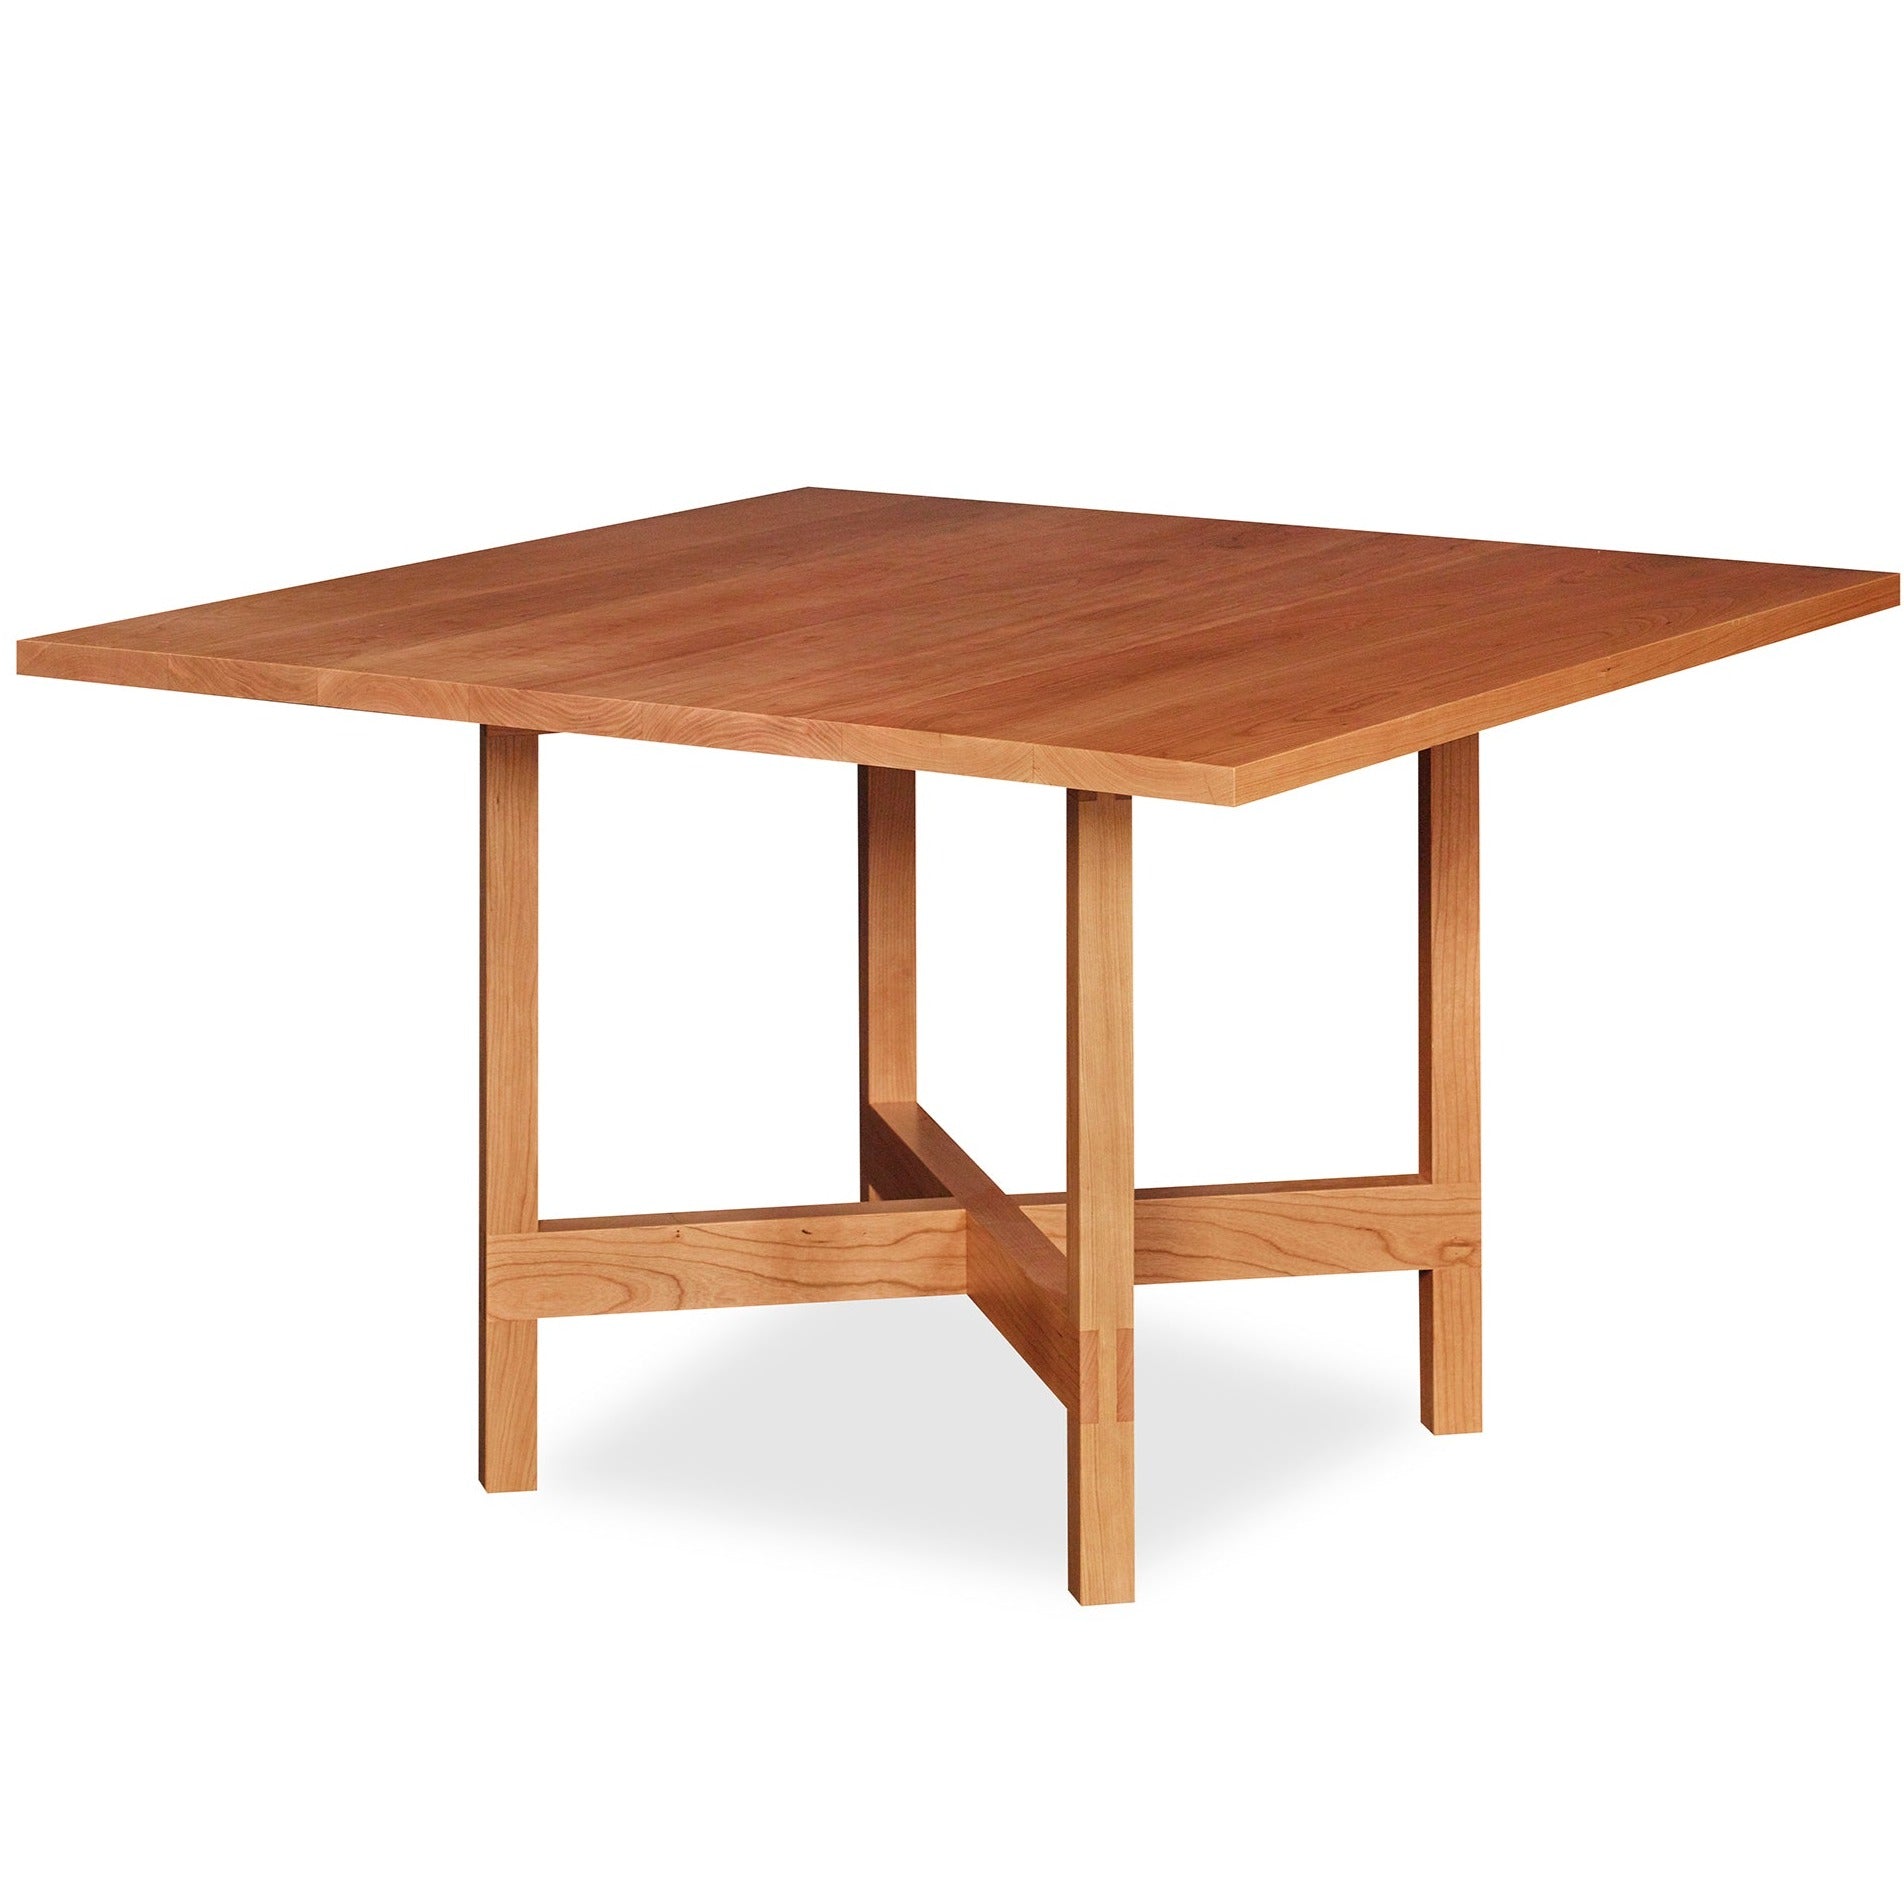 Modern square trestle table with visible joinery in cherry, from Maine's Chilton Furniture Co.